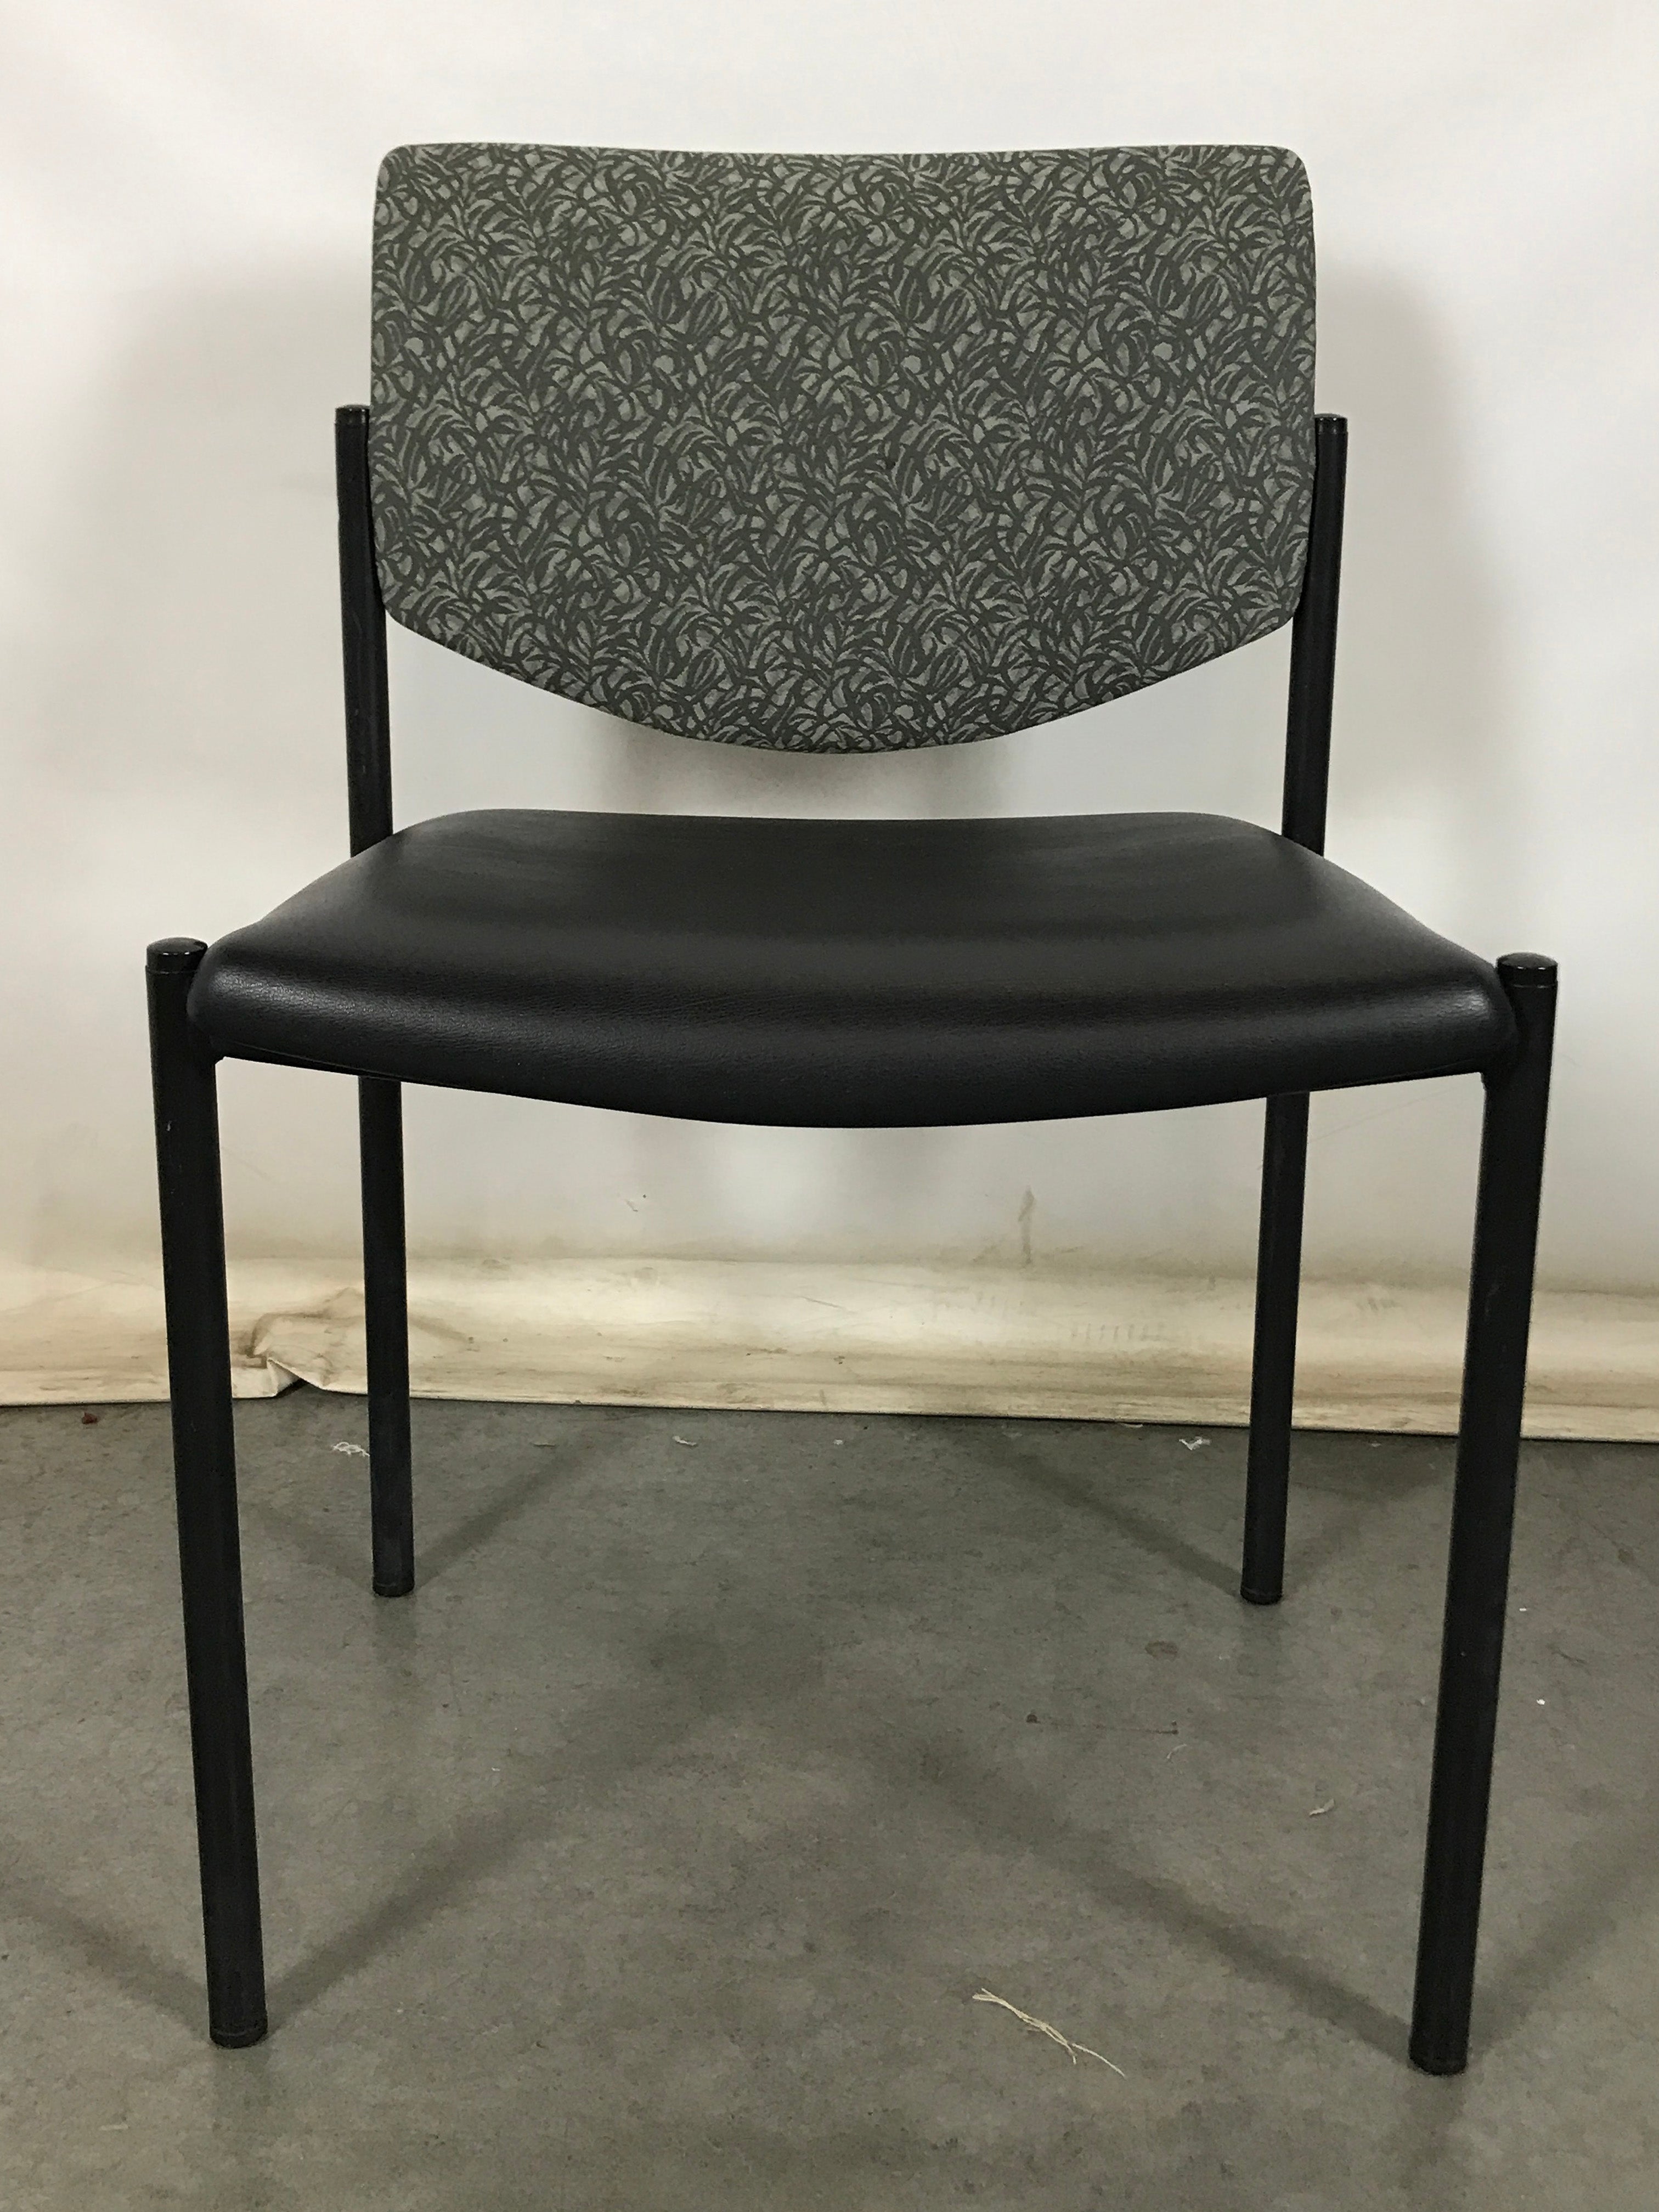 Steelcase Armless Black Chair With Green Back